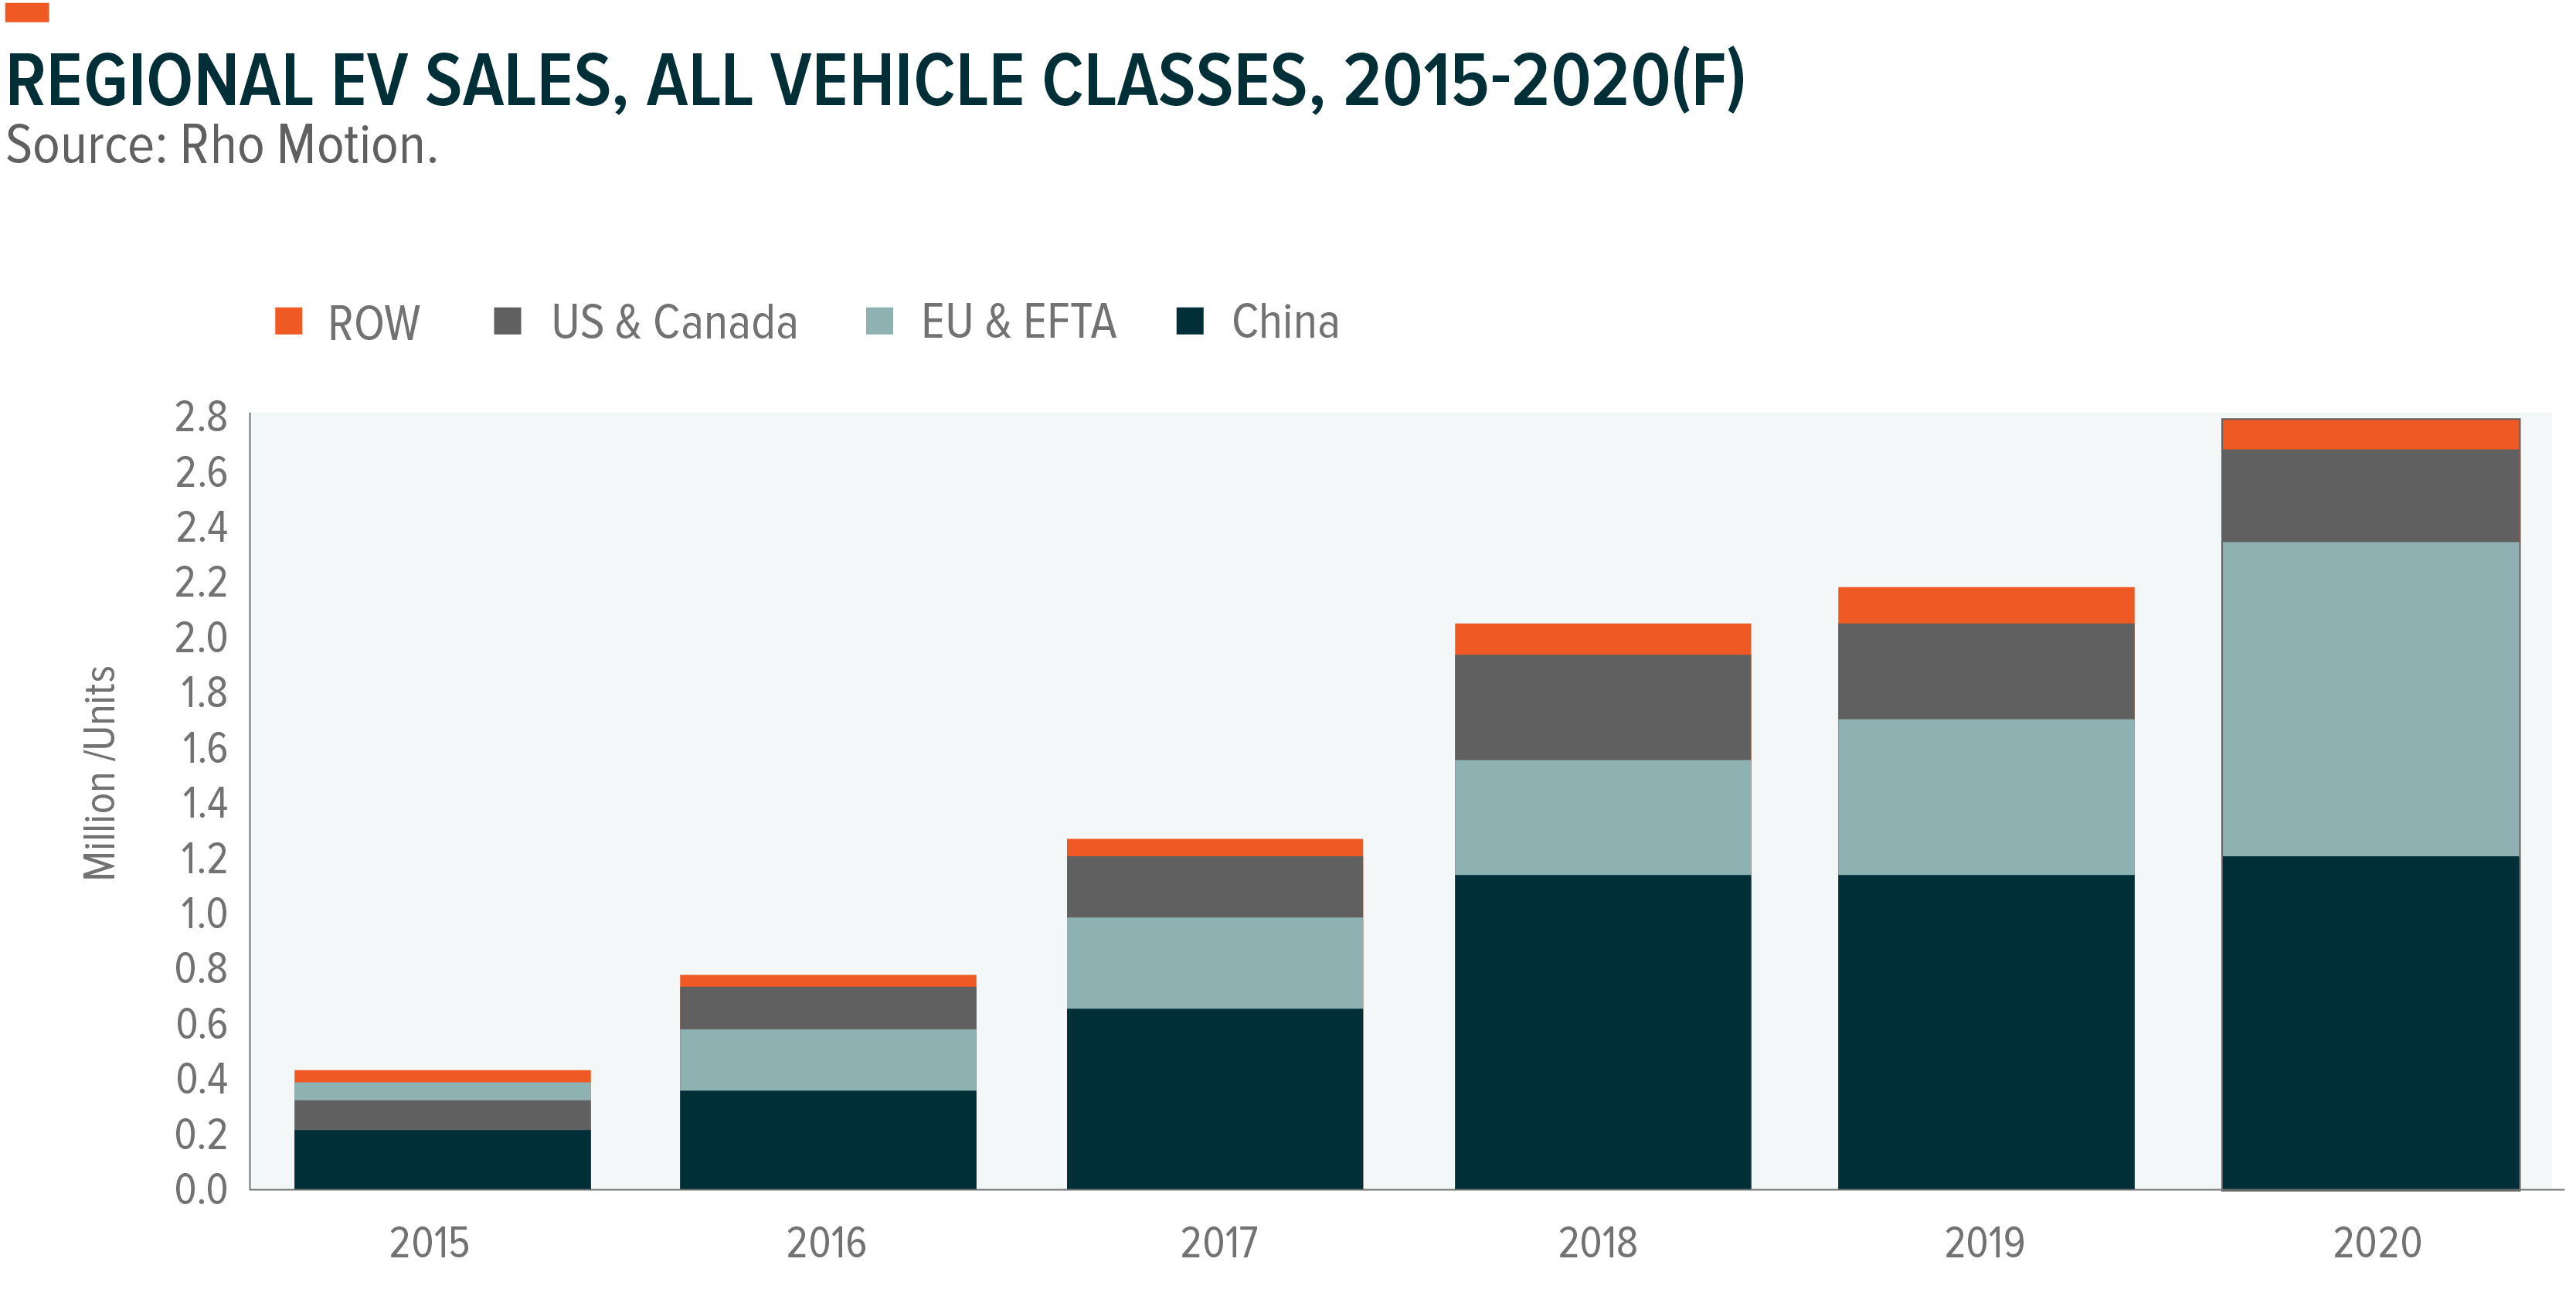 Annual Electric Vehicle (EV) Sales in Units